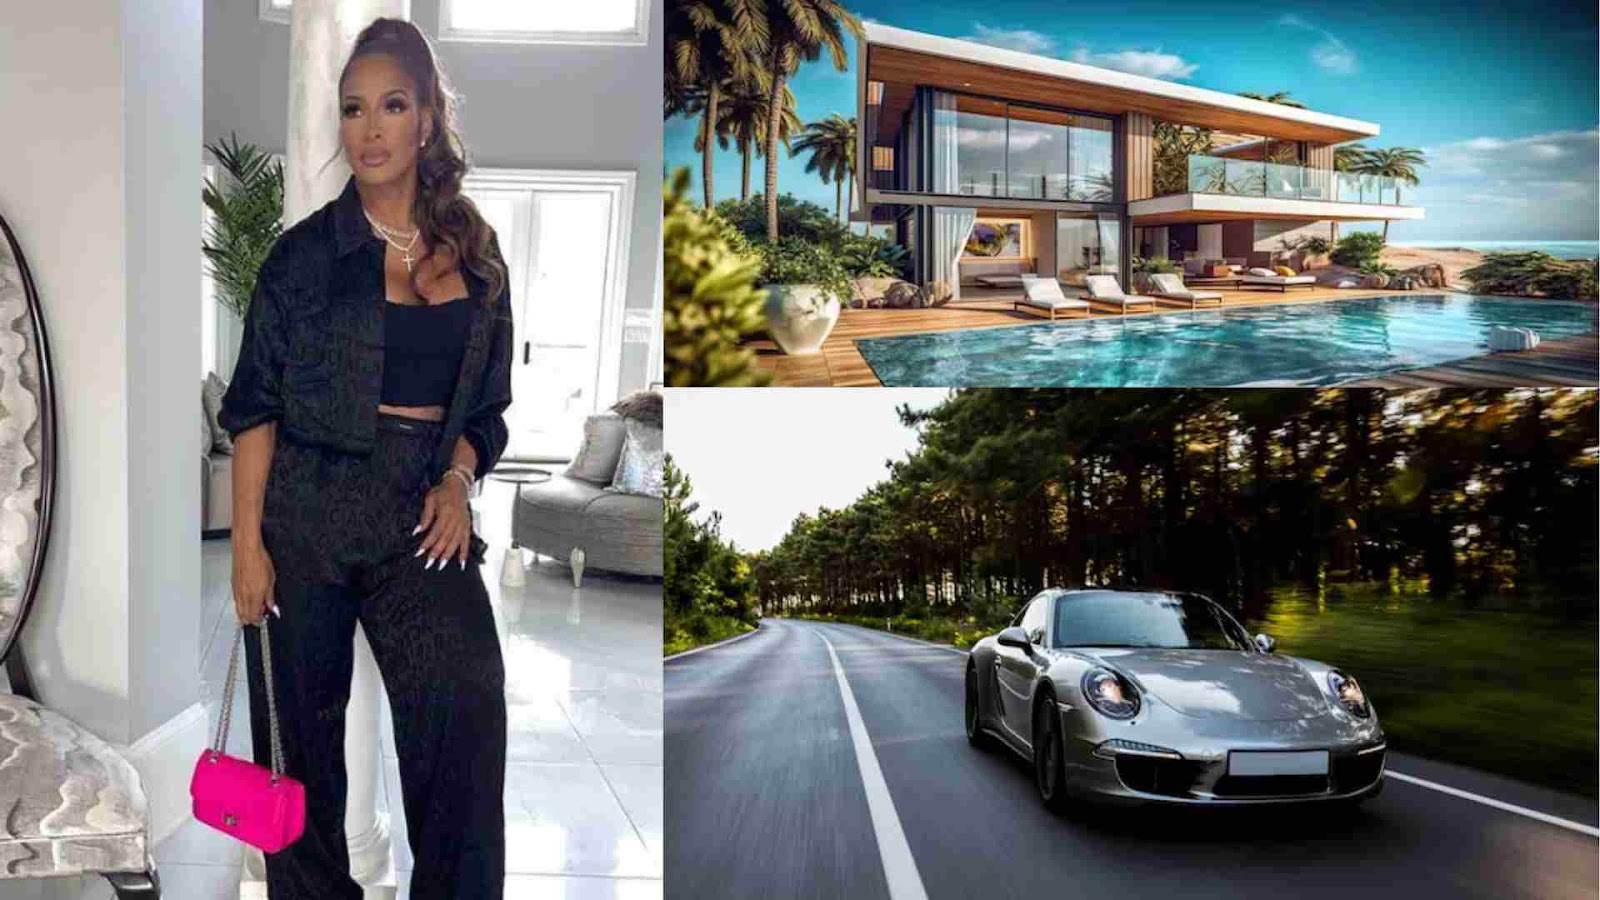 Where Did Sheree Whitfield Spend Her Money?